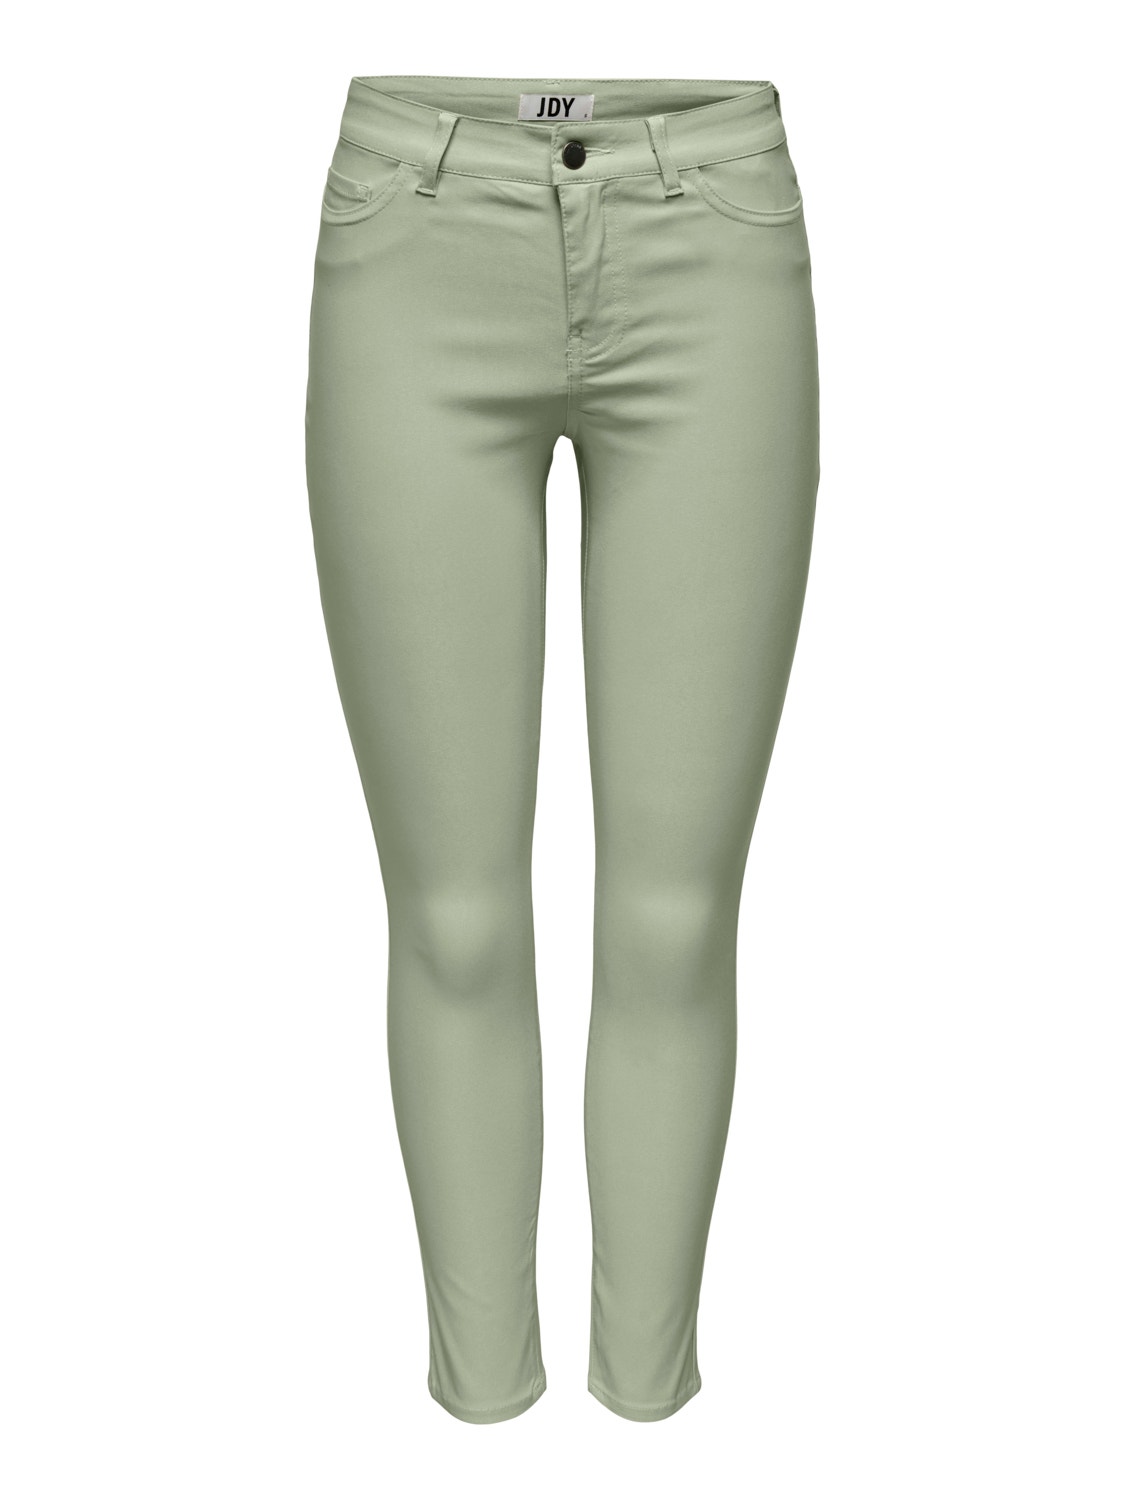 ONLY Skinny trousers with mid waist -Seagrass - 15291267